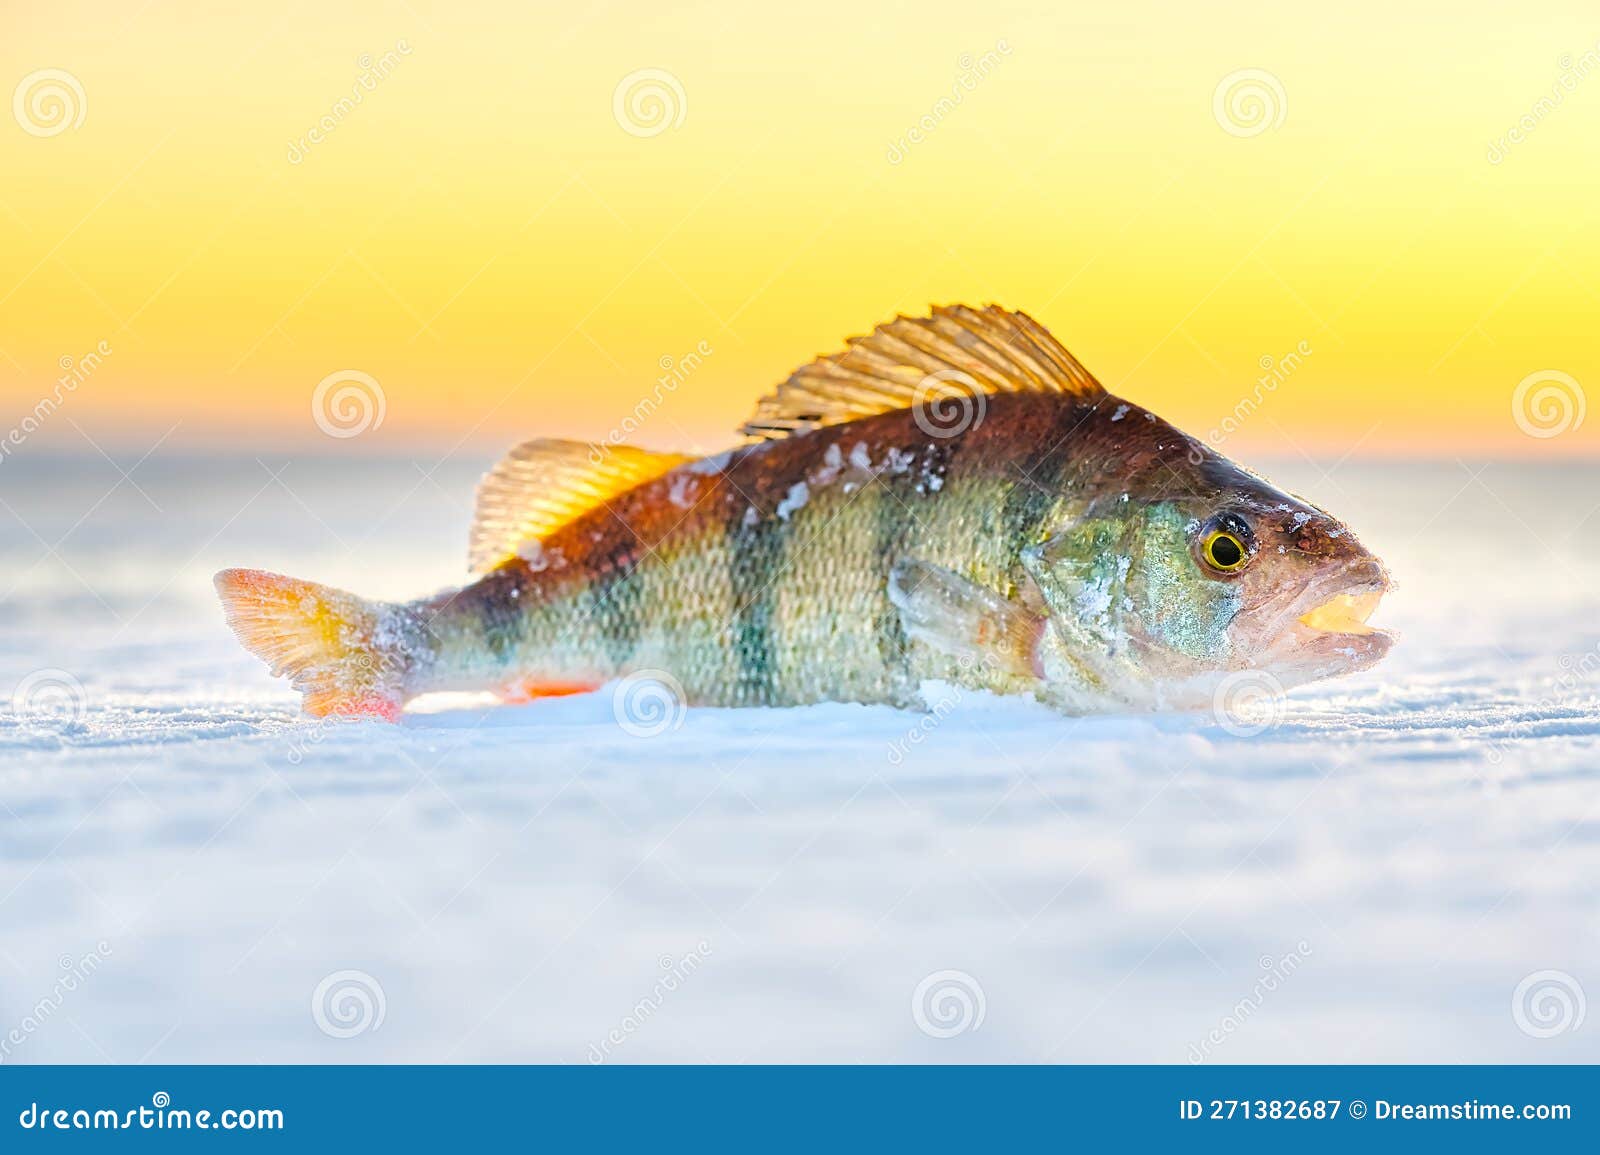 Ice Fishing Perch on the Snow. Winter Fishing, Perch Fish on the Ice in  Winter on the Sea Lake River Stock Image - Image of outdoor, cold: 271382687